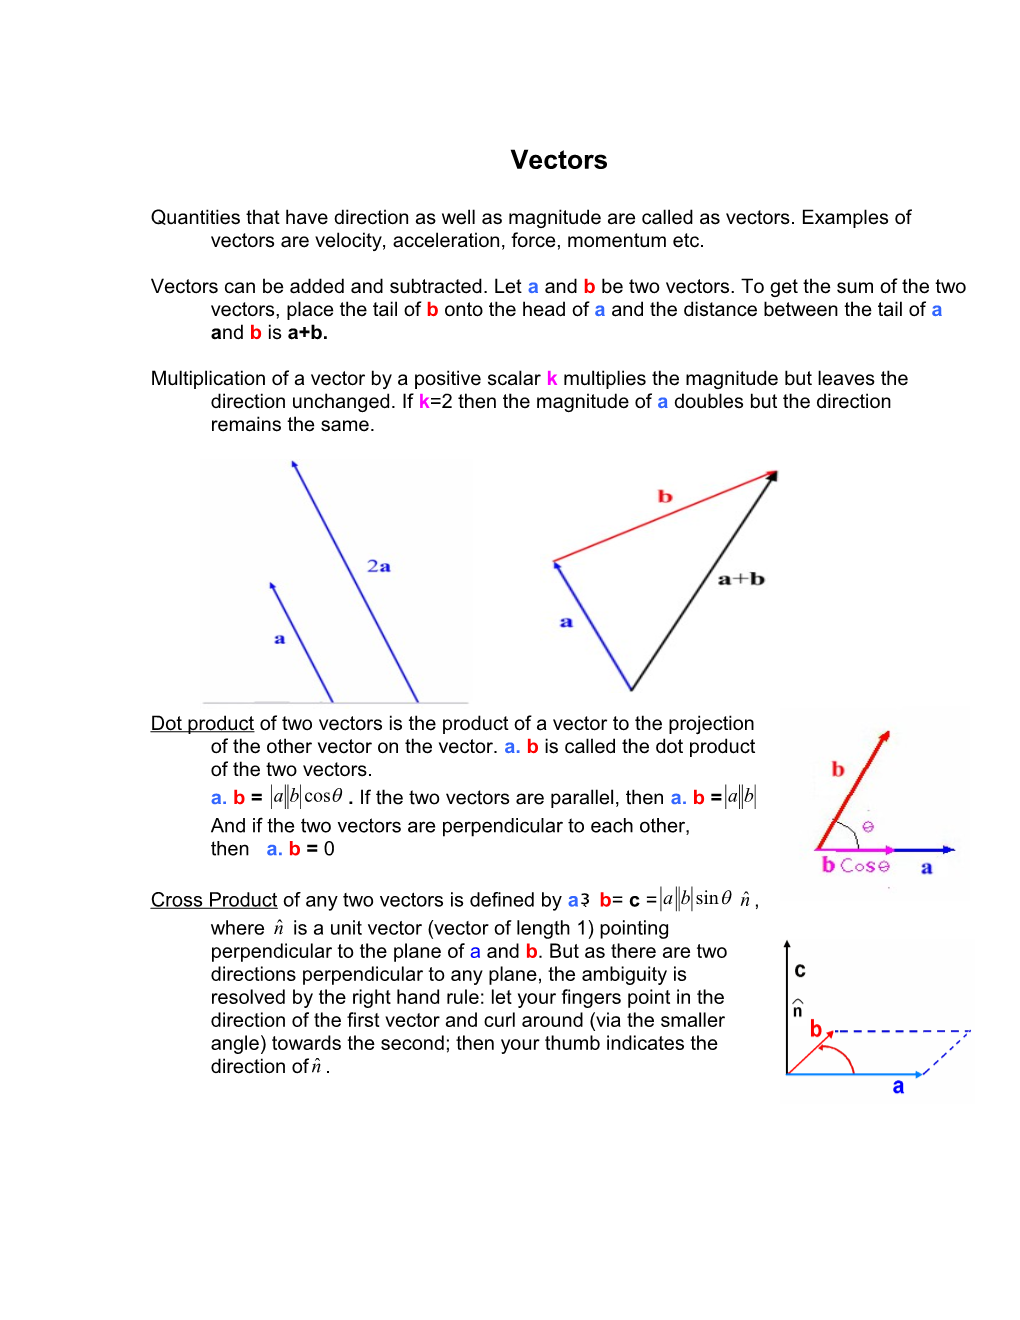 Quantities That Have Direction As Well As Magnitude Are Called As Vectors. Examples Of